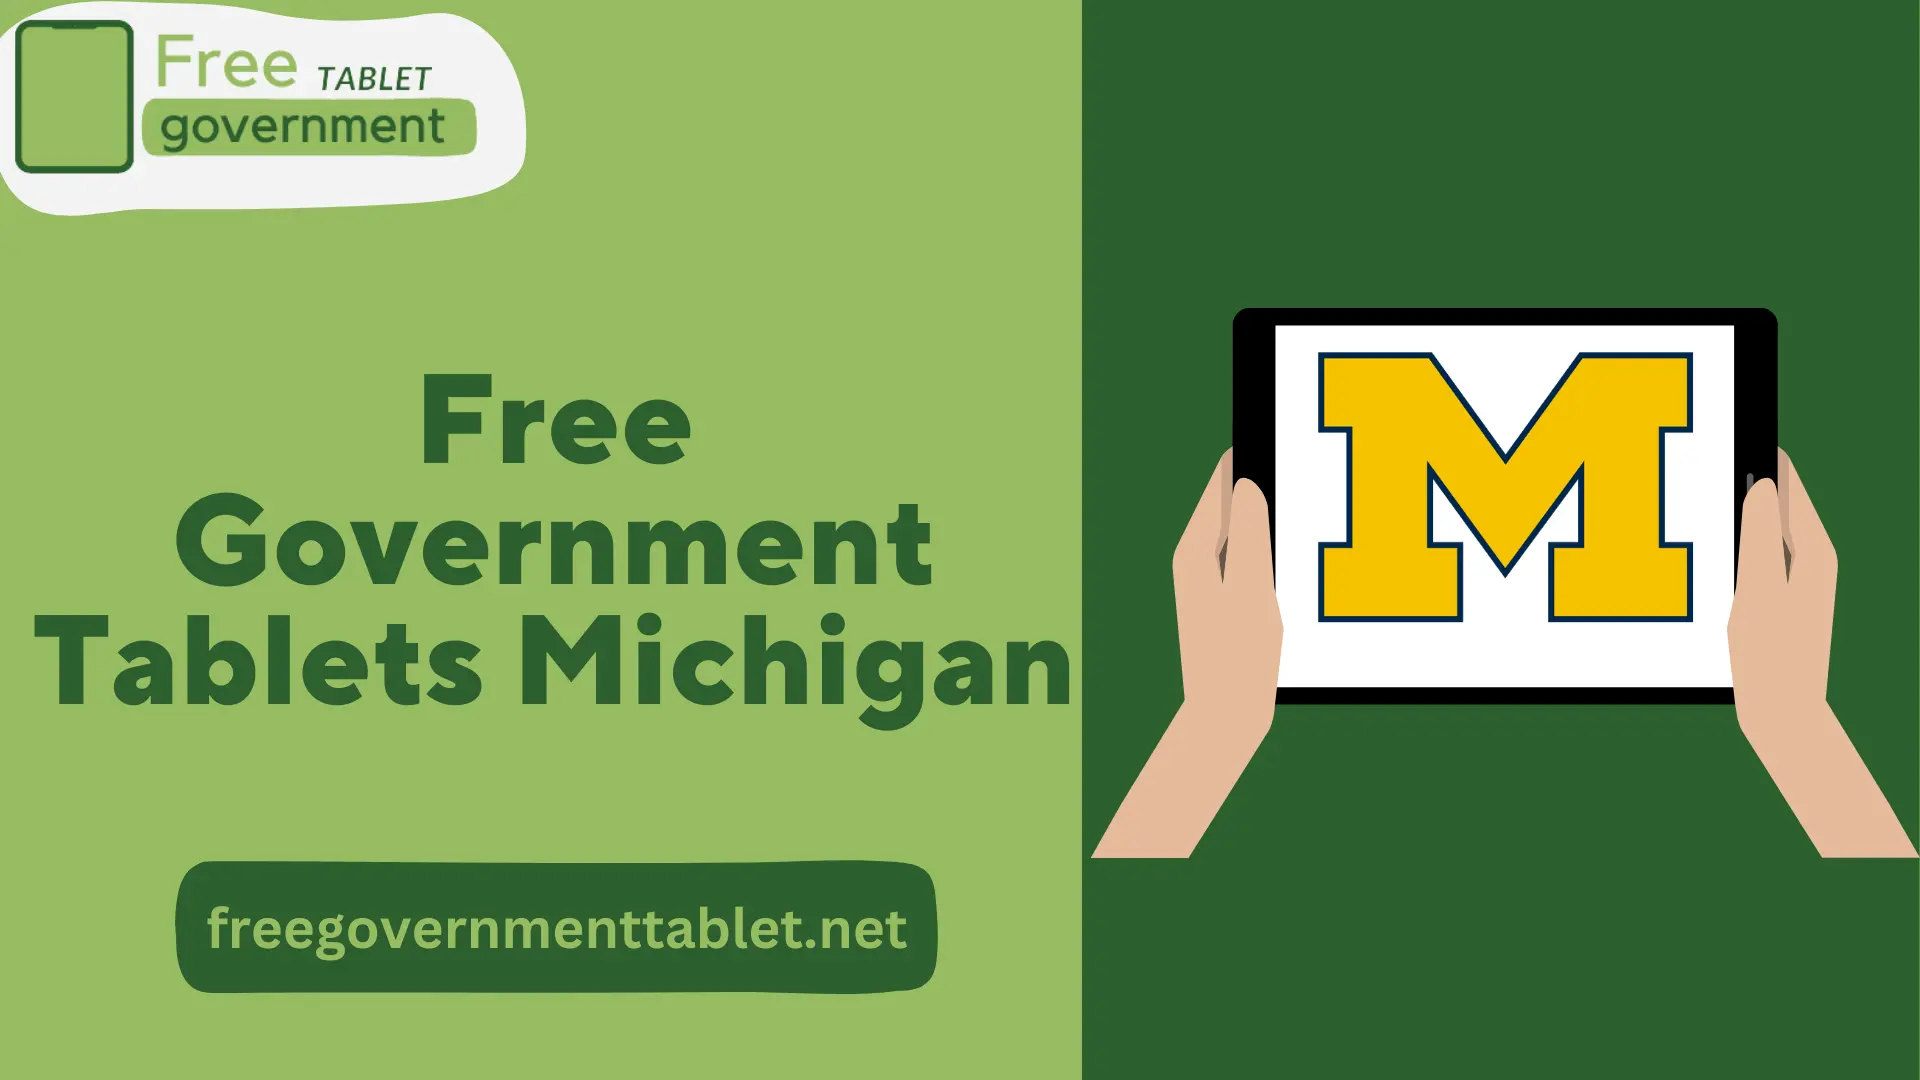 Free Government Tablet Michigan